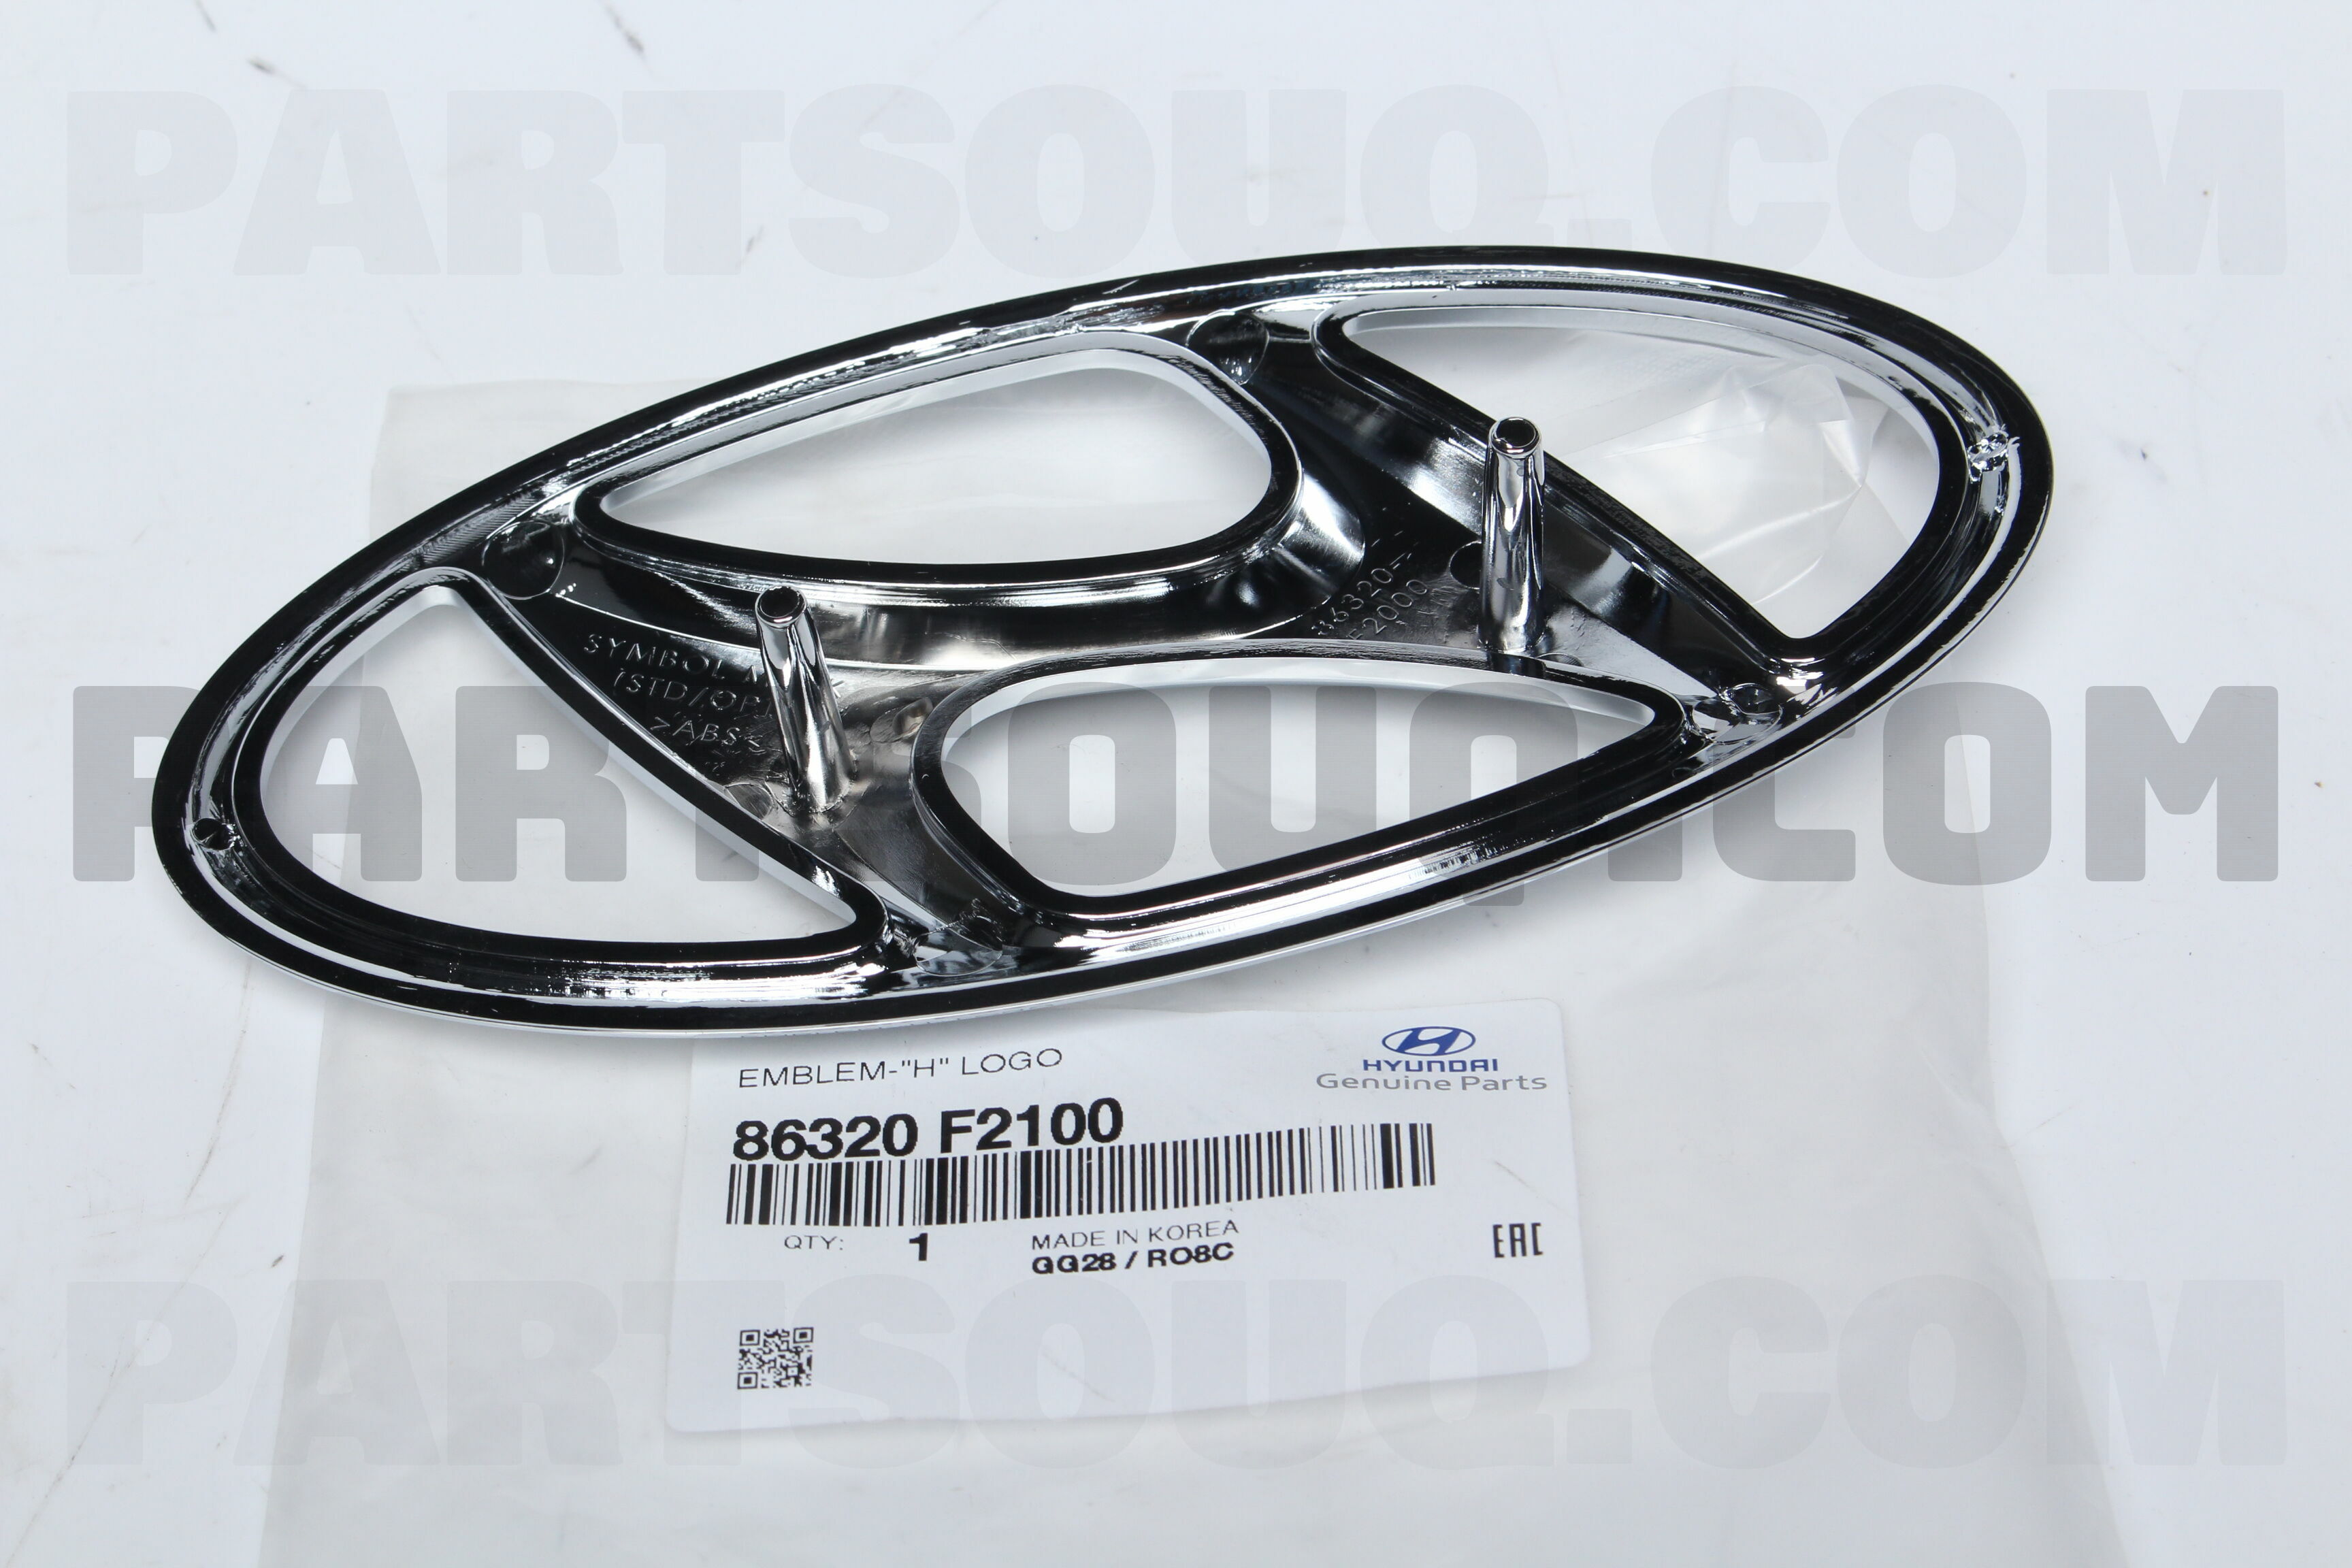 Genuine] 863631R000 Front H Logo Emblem For Hyundai Accent 11-12 ⭐Low Price⭐  | eBay